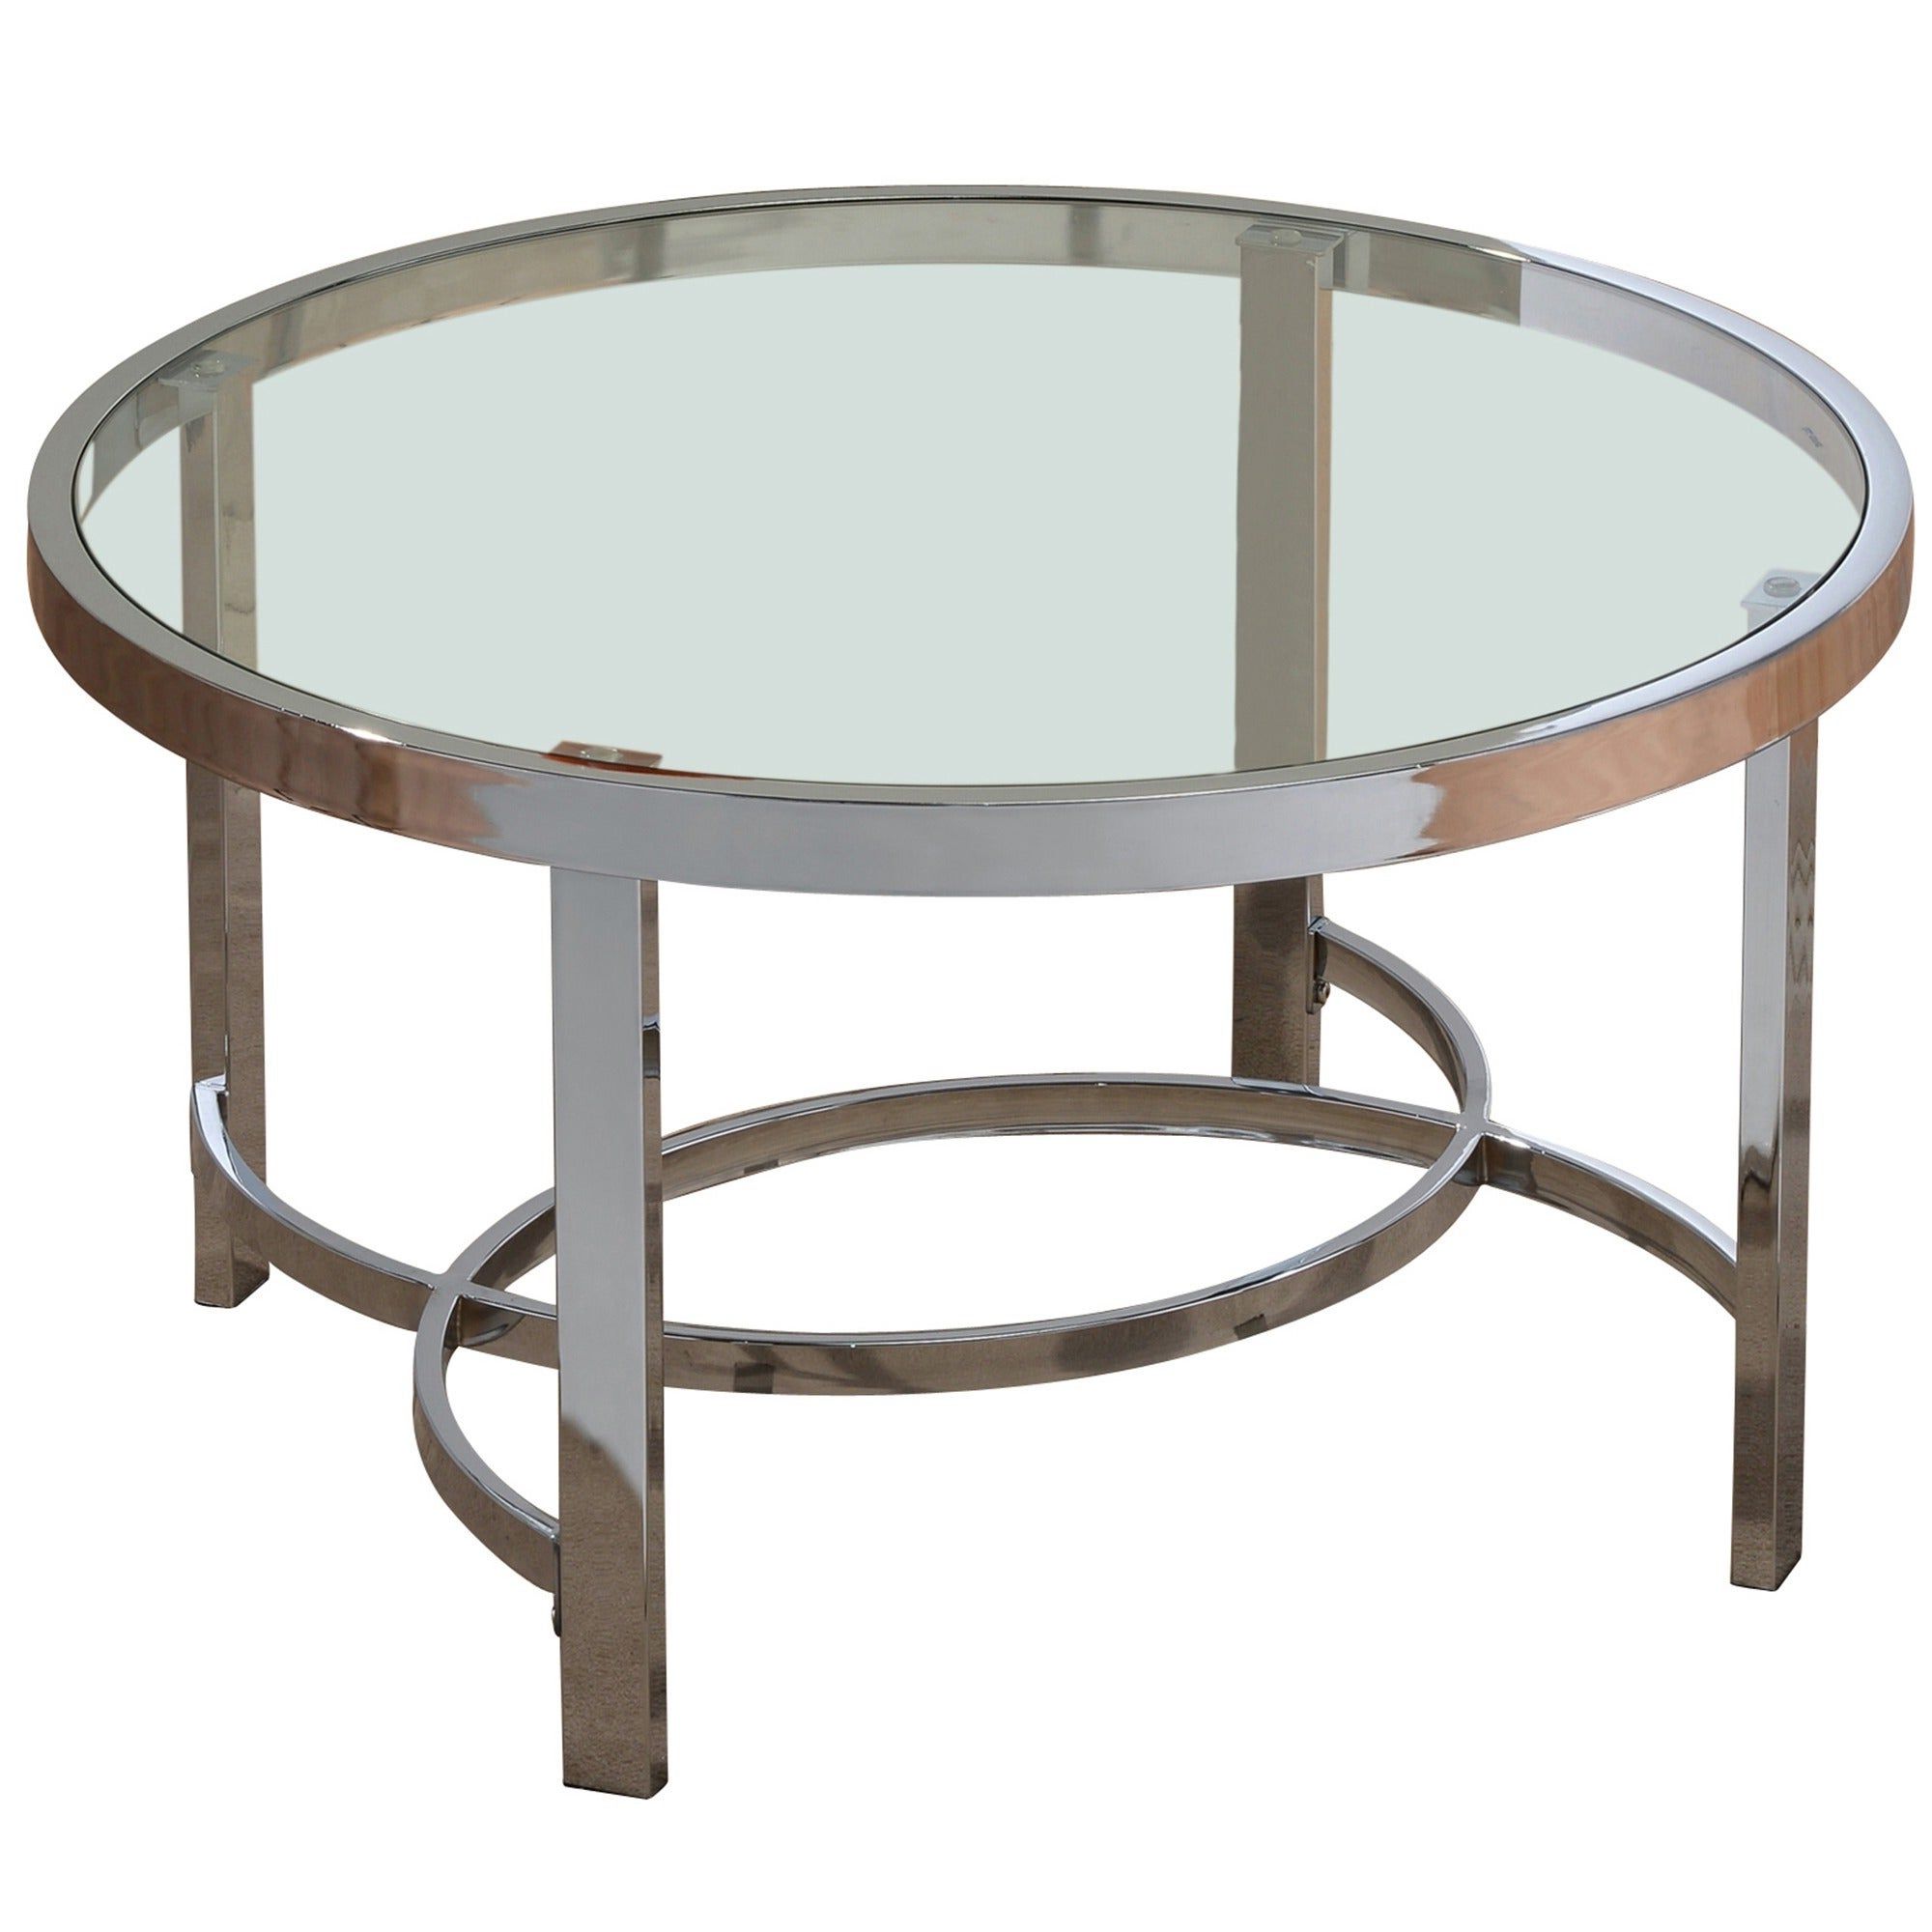 Strata 32 Inch Chrome/ Glass Coffee Table In Current Strata Chrome Glass Coffee Tables (View 1 of 20)